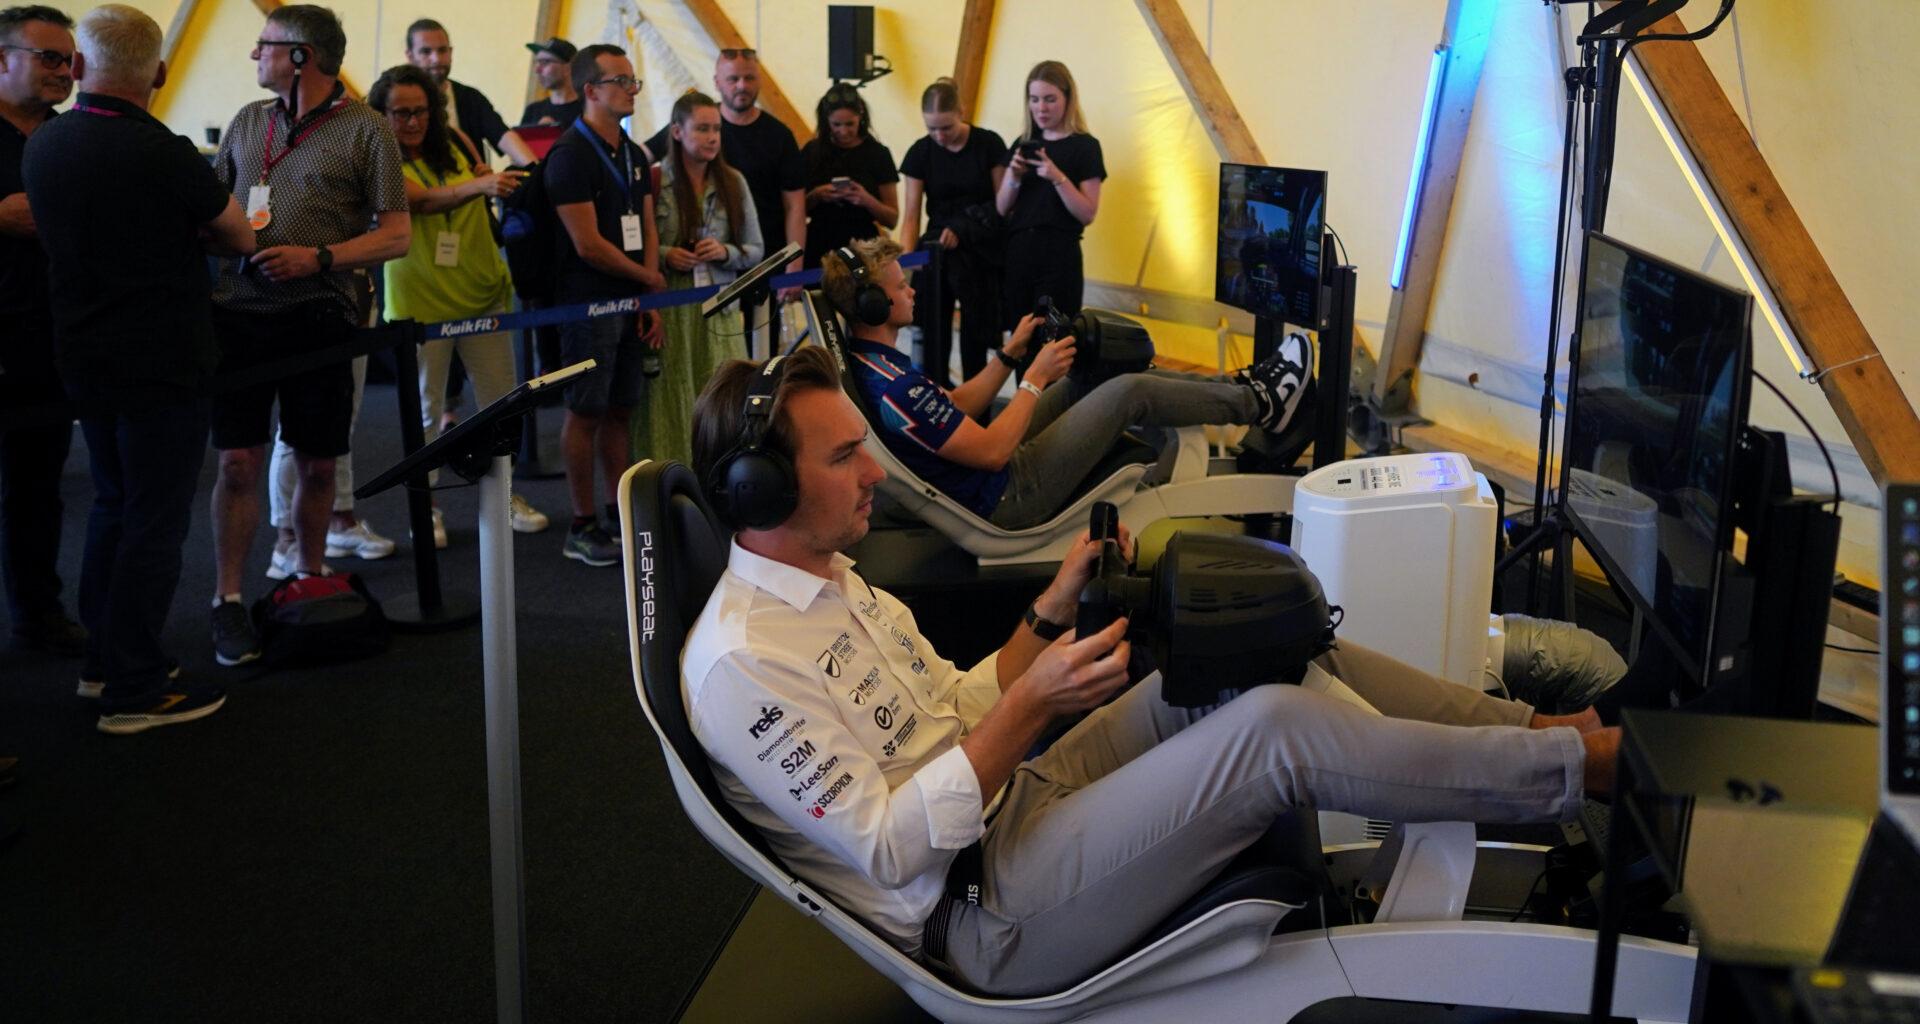 BTCC drivers take part in sim races at Goodwood Festival of Speed